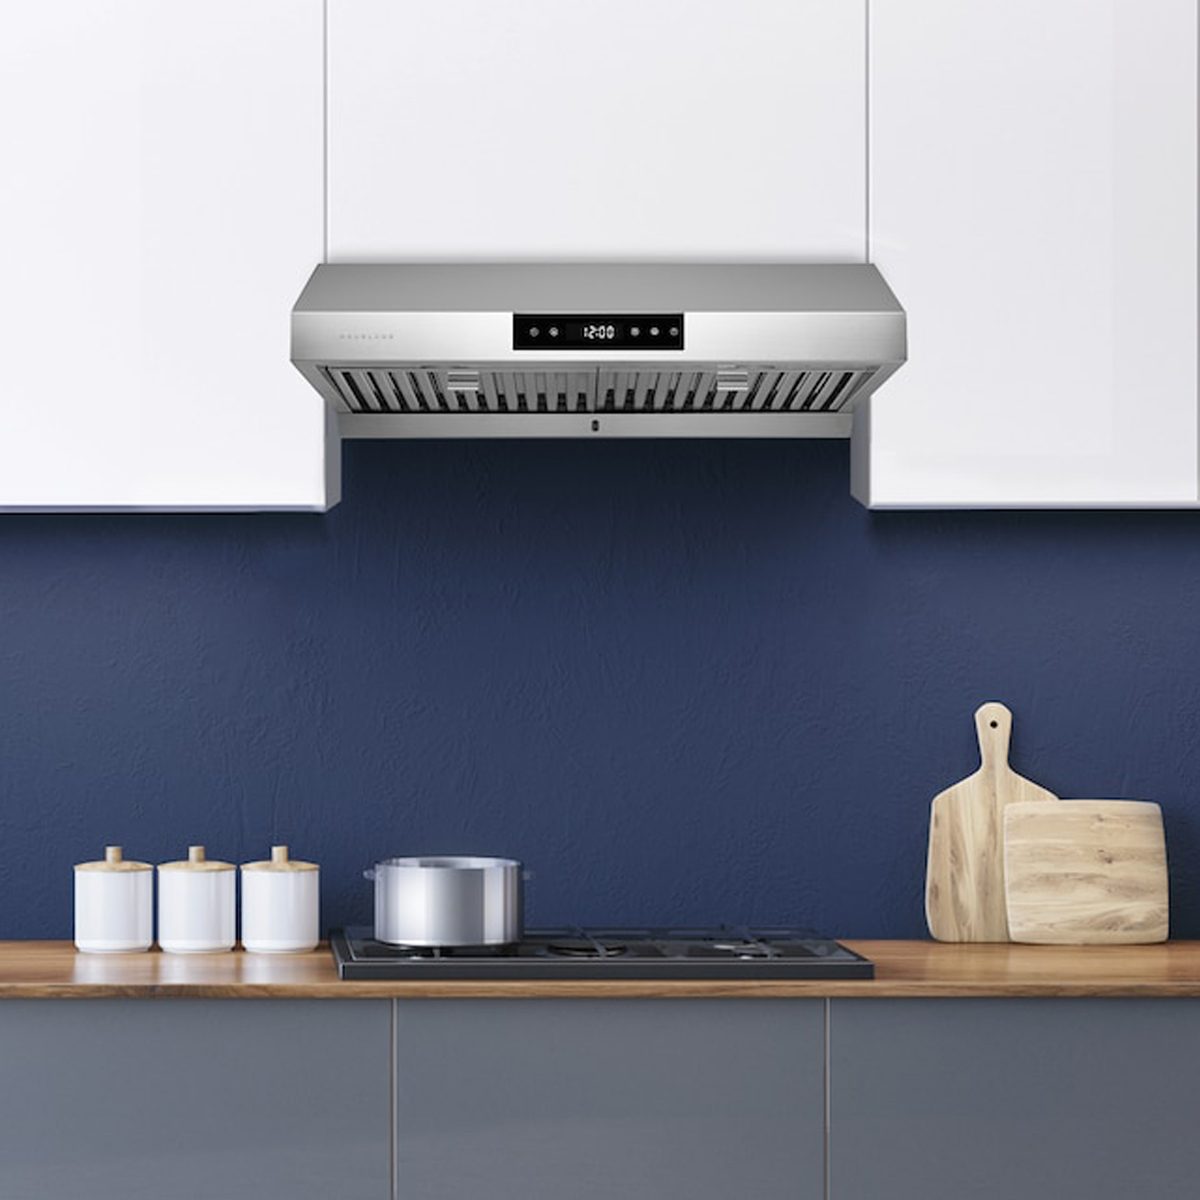 Hauslane Chef 30 In Ducted Stainless Steel Undercabinet Range Hood Ecomm Lowes.com  ?w=1200